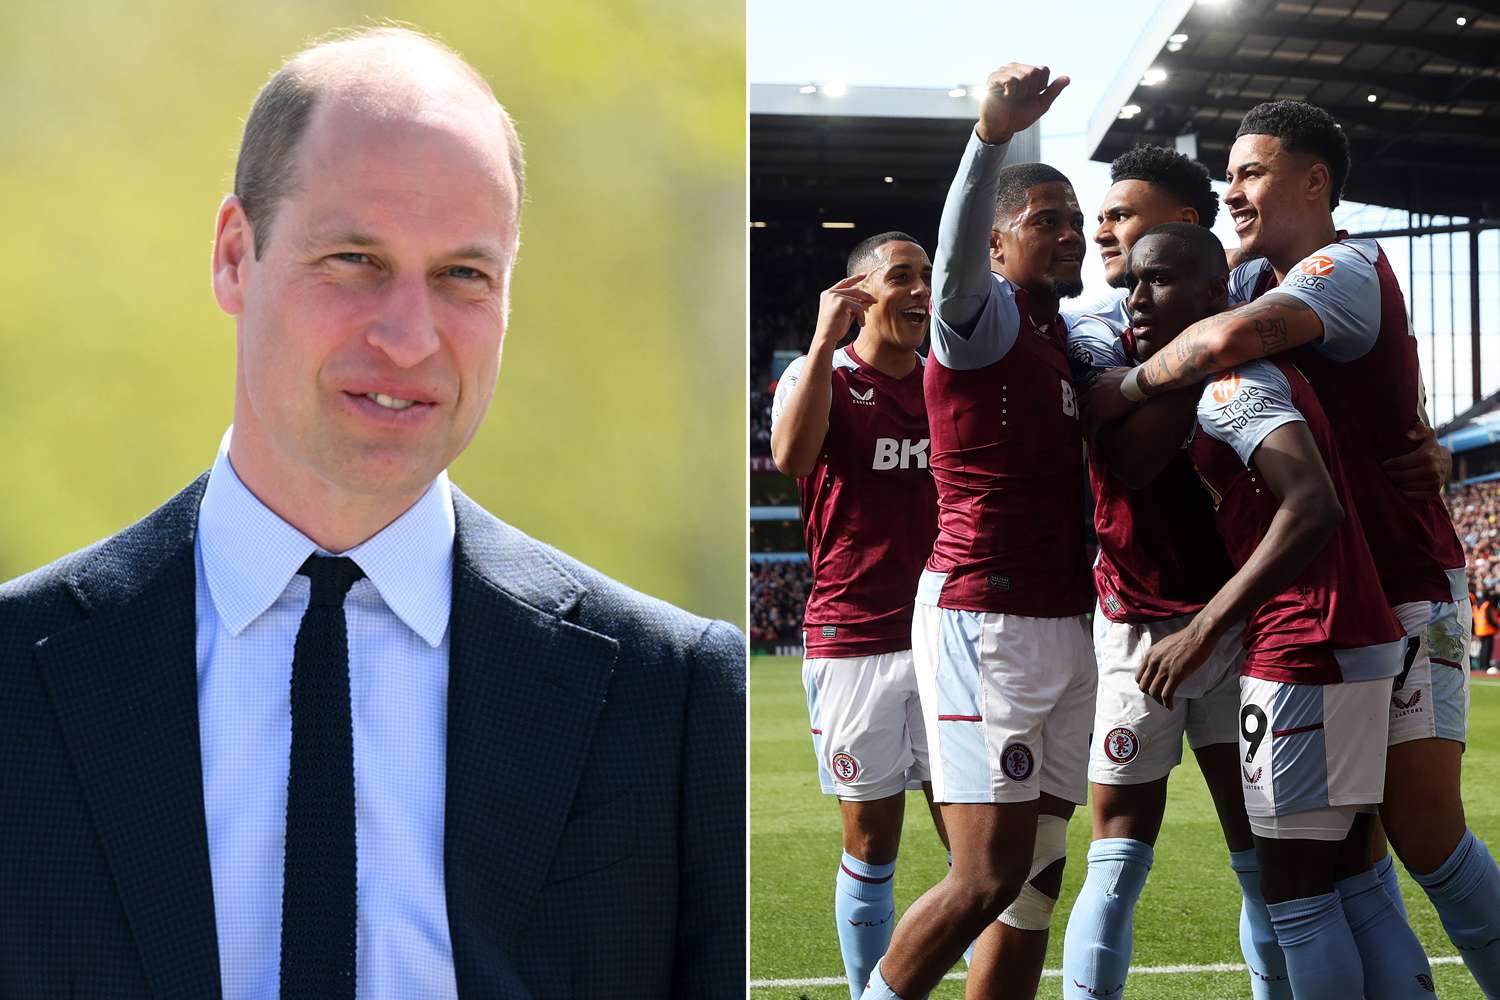 Prince William Celebrates Exciting News for His Favorite Soccer Team [Video]